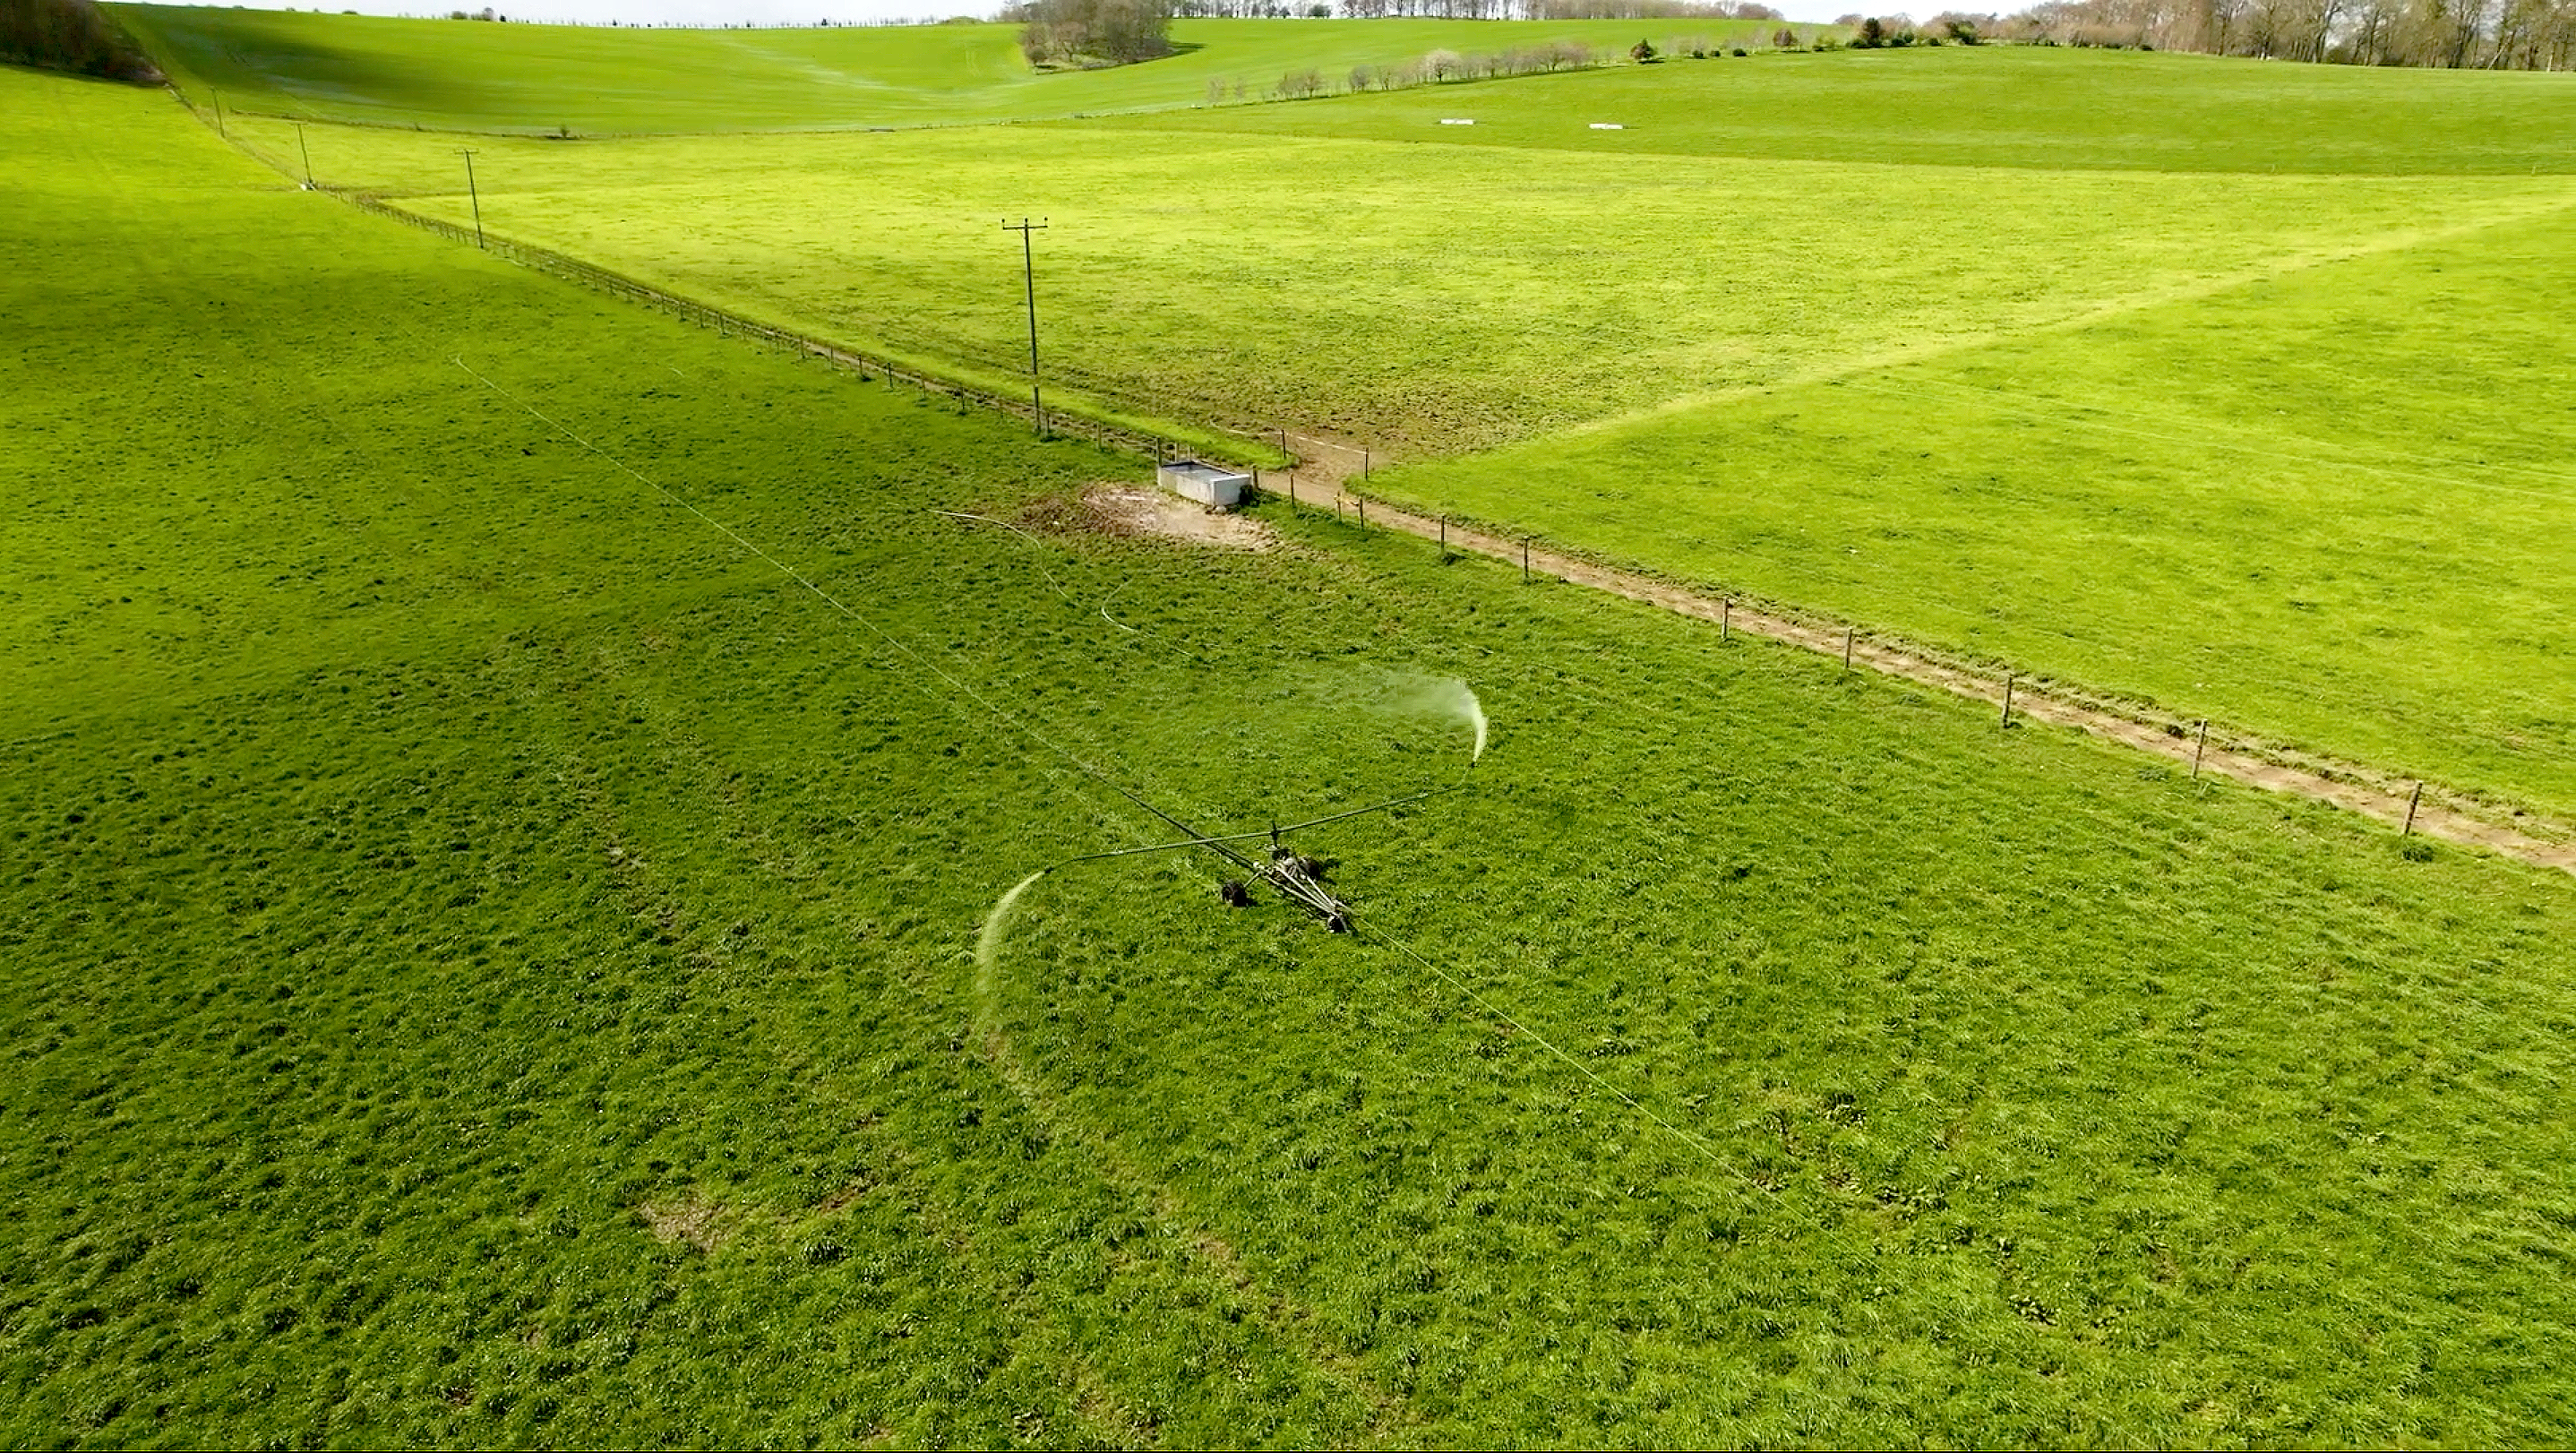 Origin Digital and Aspia Space have announced a world-first technology that accurately measures the height of grass from space, offering new insight for increasing farm productivity and verifying sustainability practices. Credit: Origin Digital